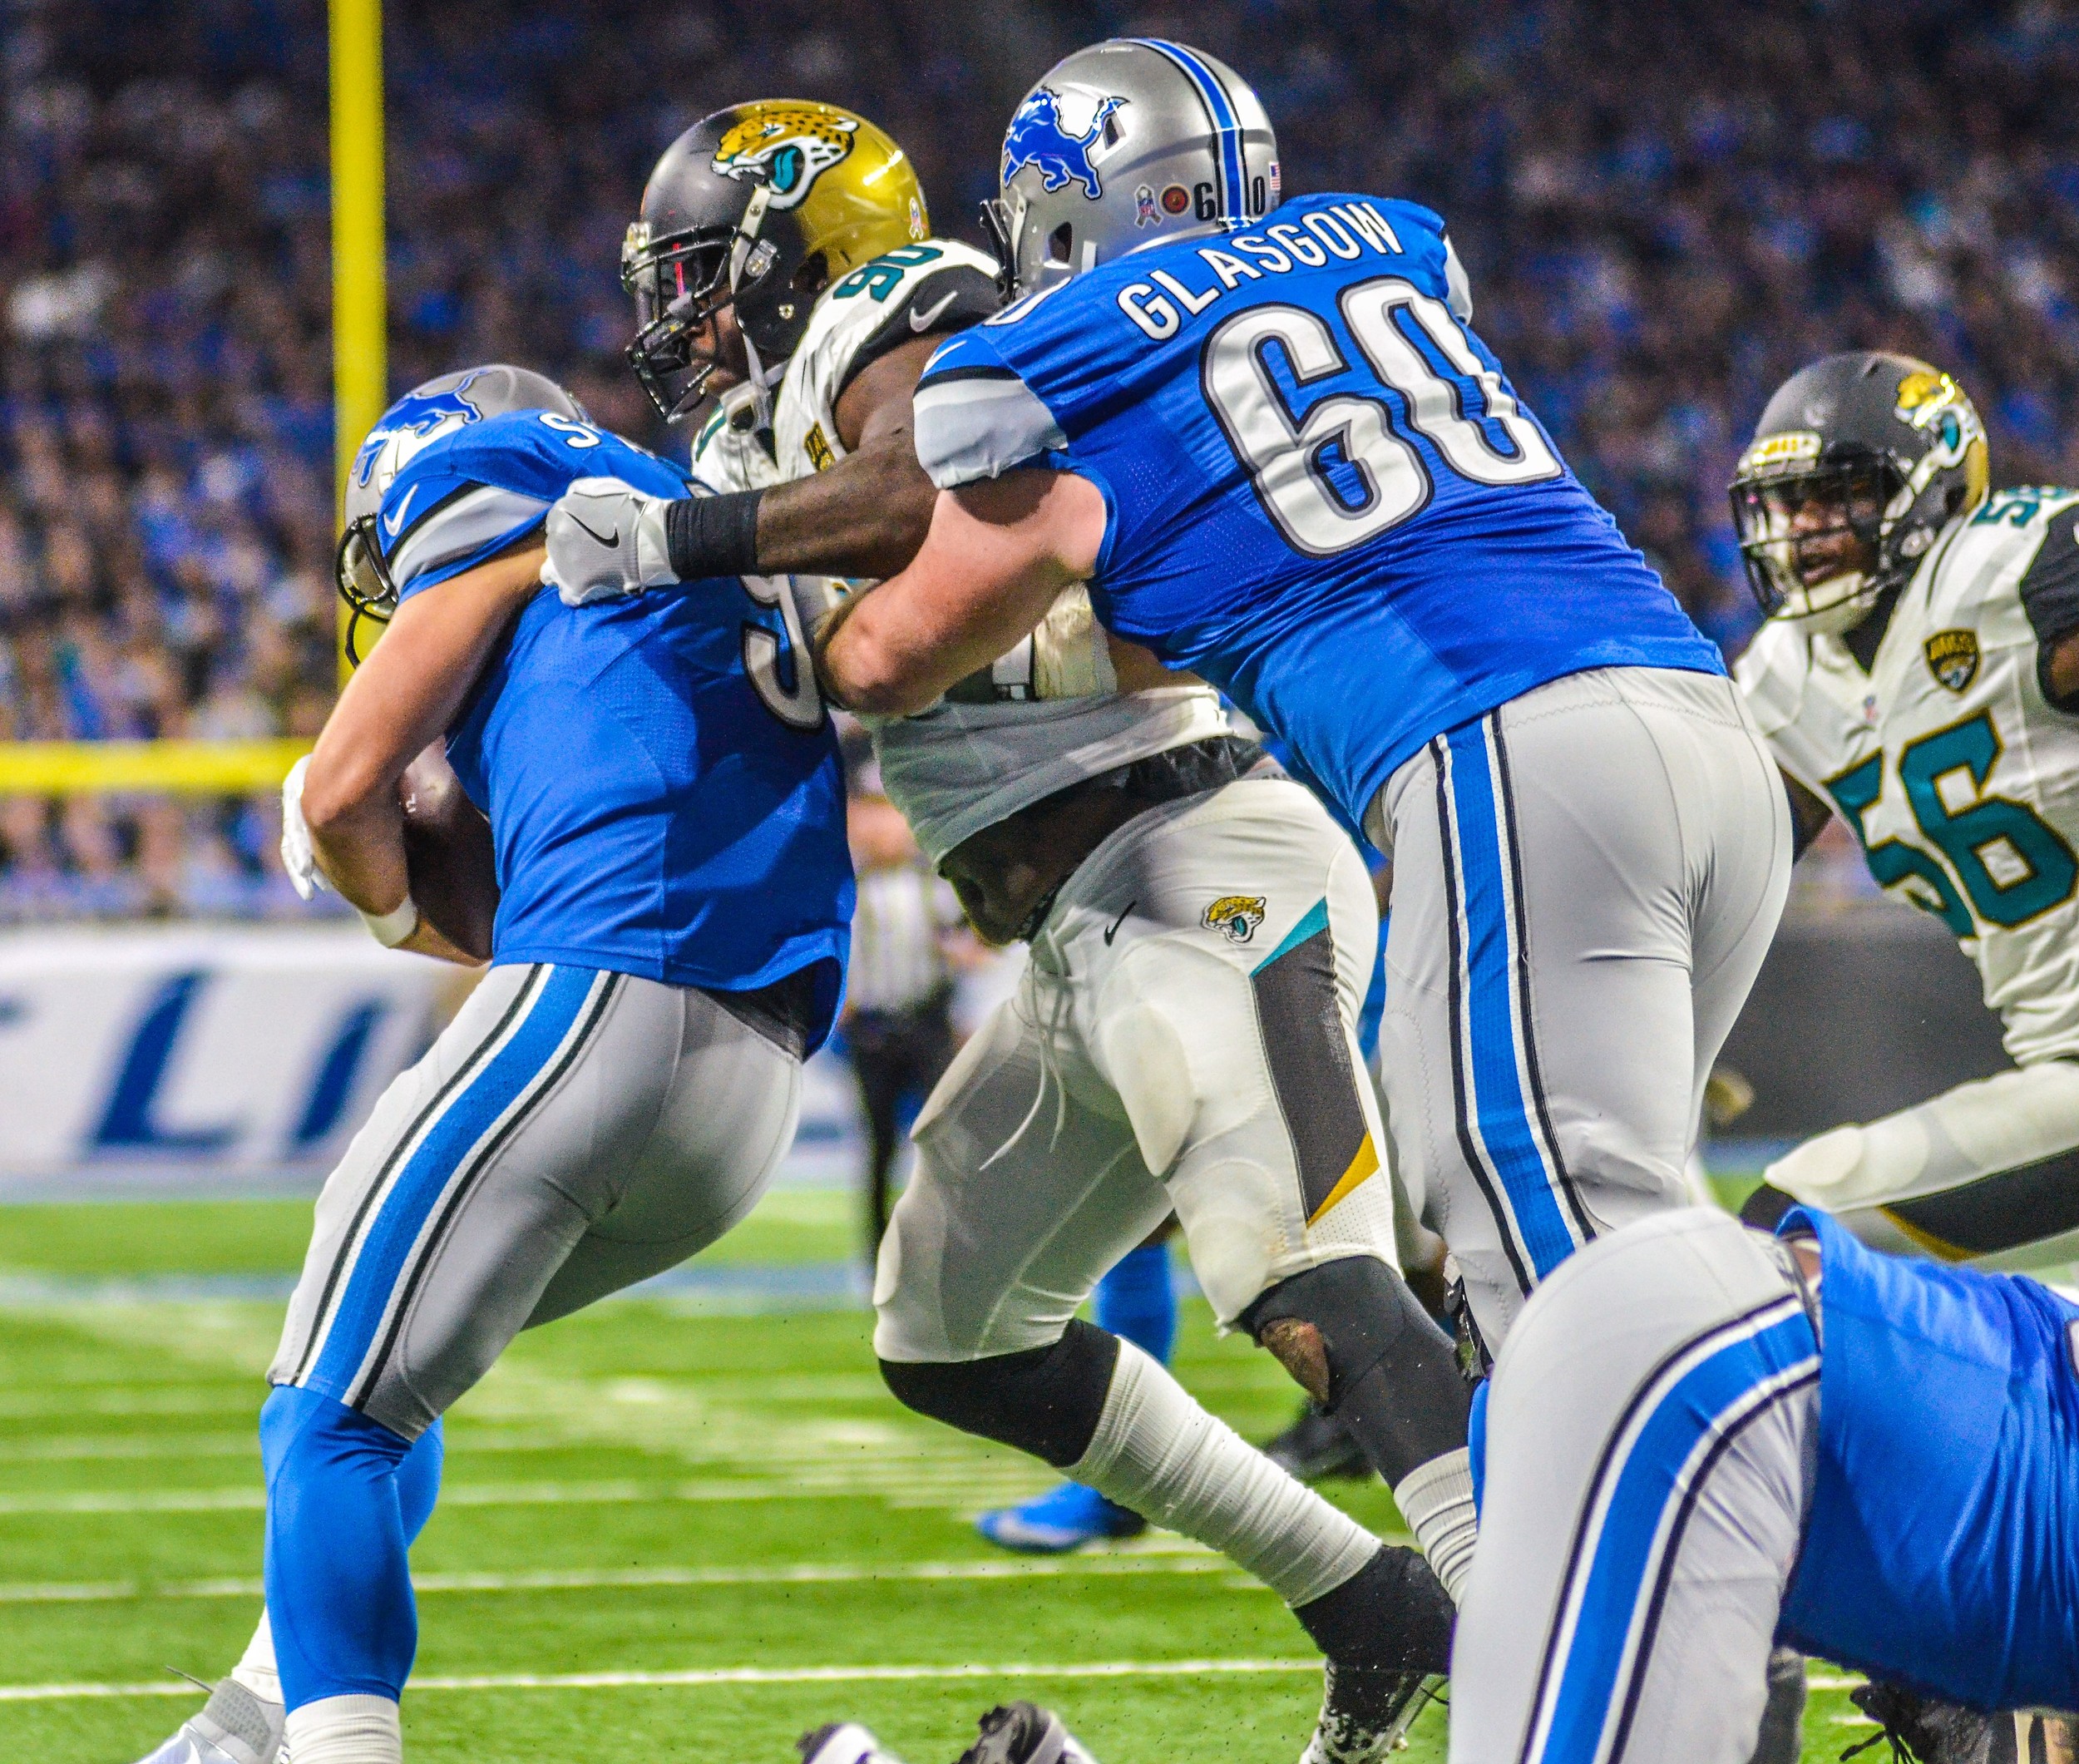 The Lions beat the Jacksonville Jaguars 26-19 on Sunday, extending a streak in which every Detroit game this season has been decided by seven points or fewer. It was the third consecutive Jaguars loss in which they outgained a playoff-contending opponent and fifth straight loss.